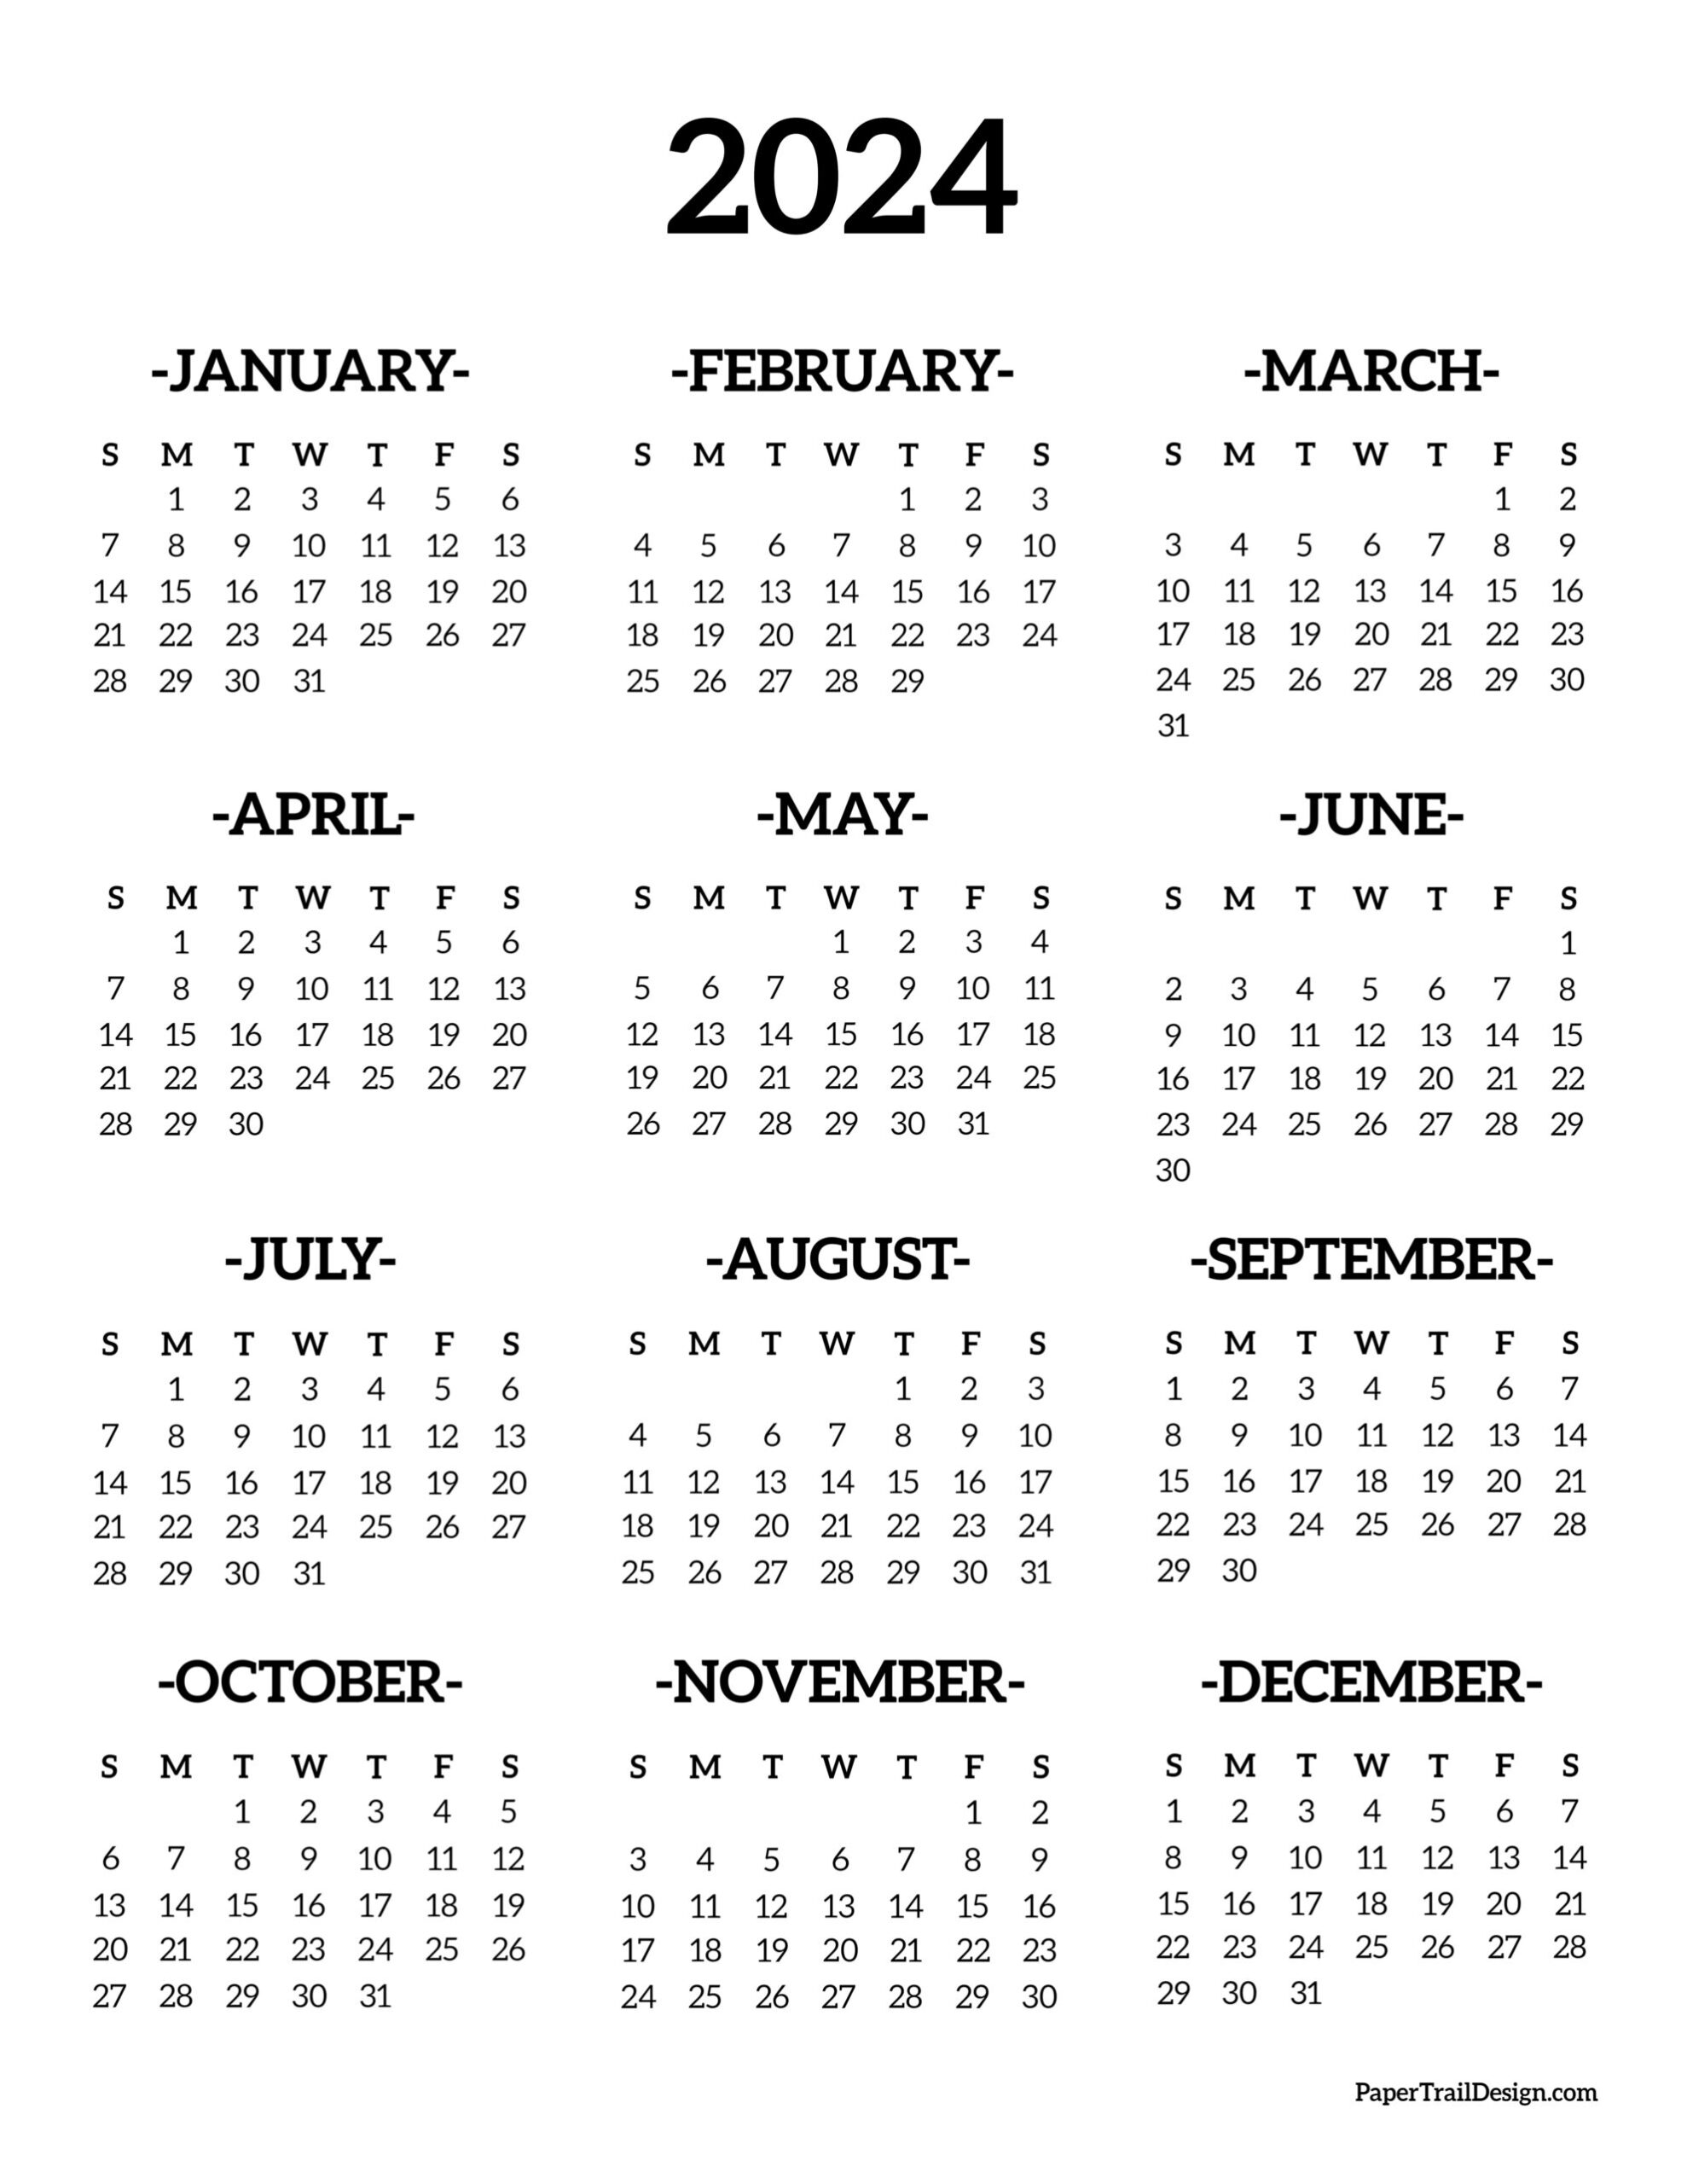 Calendar 2024 Printable One Page - Paper Trail Design for Free Printable Calendar 2024 Yearly